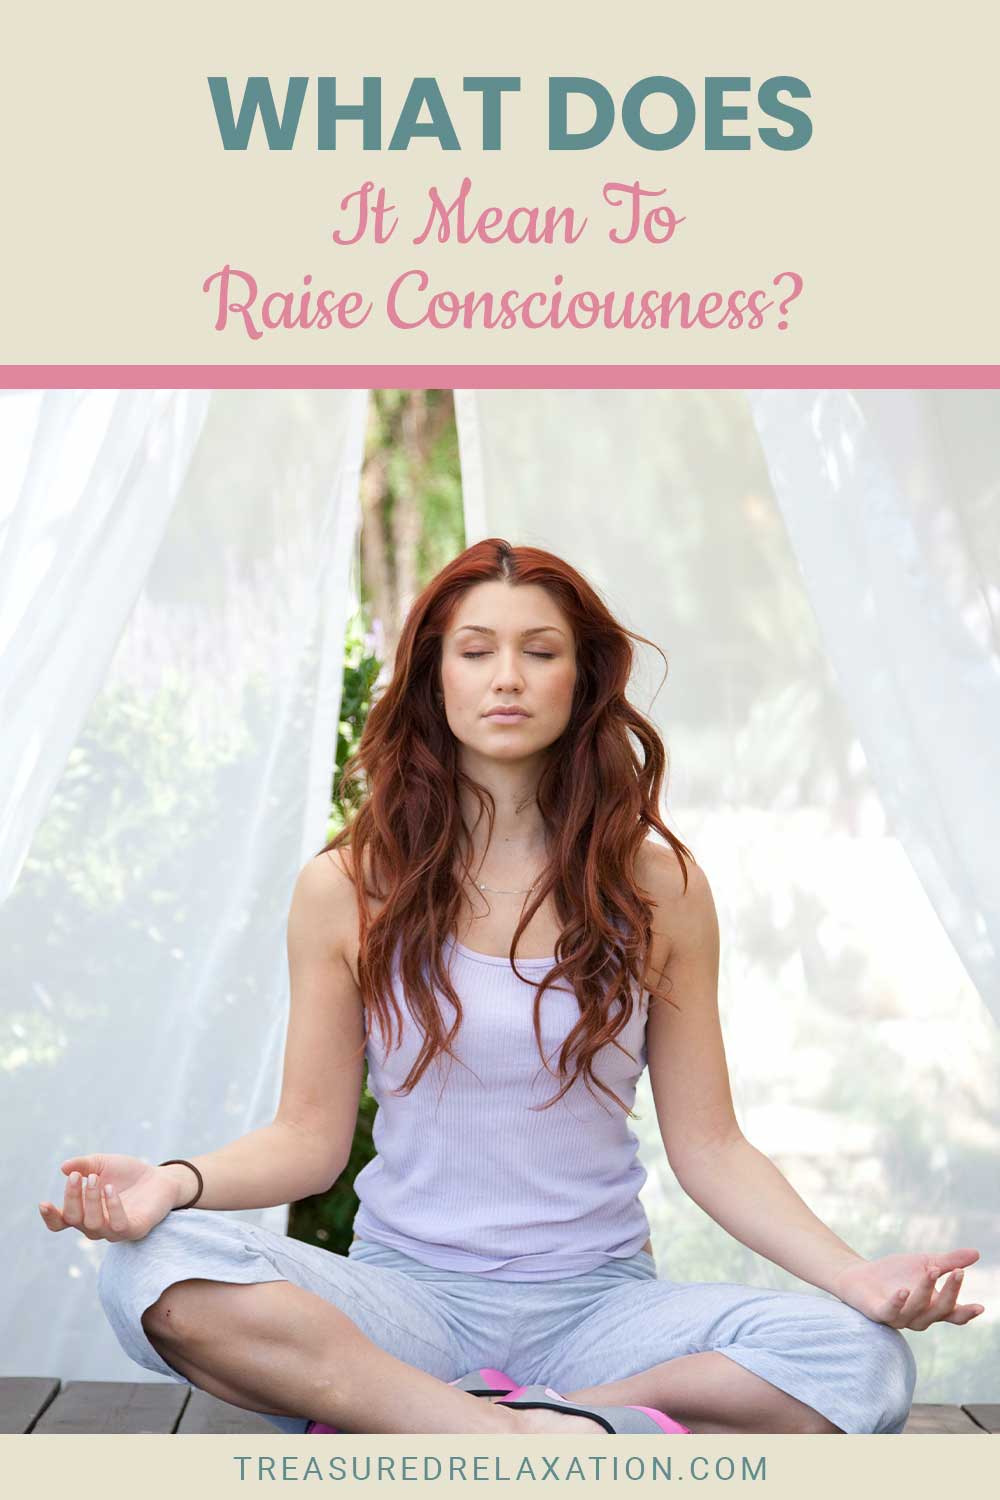 Woman in yoga pose sitting with her eyes closed - What Does It Mean To Raise Consciousness?